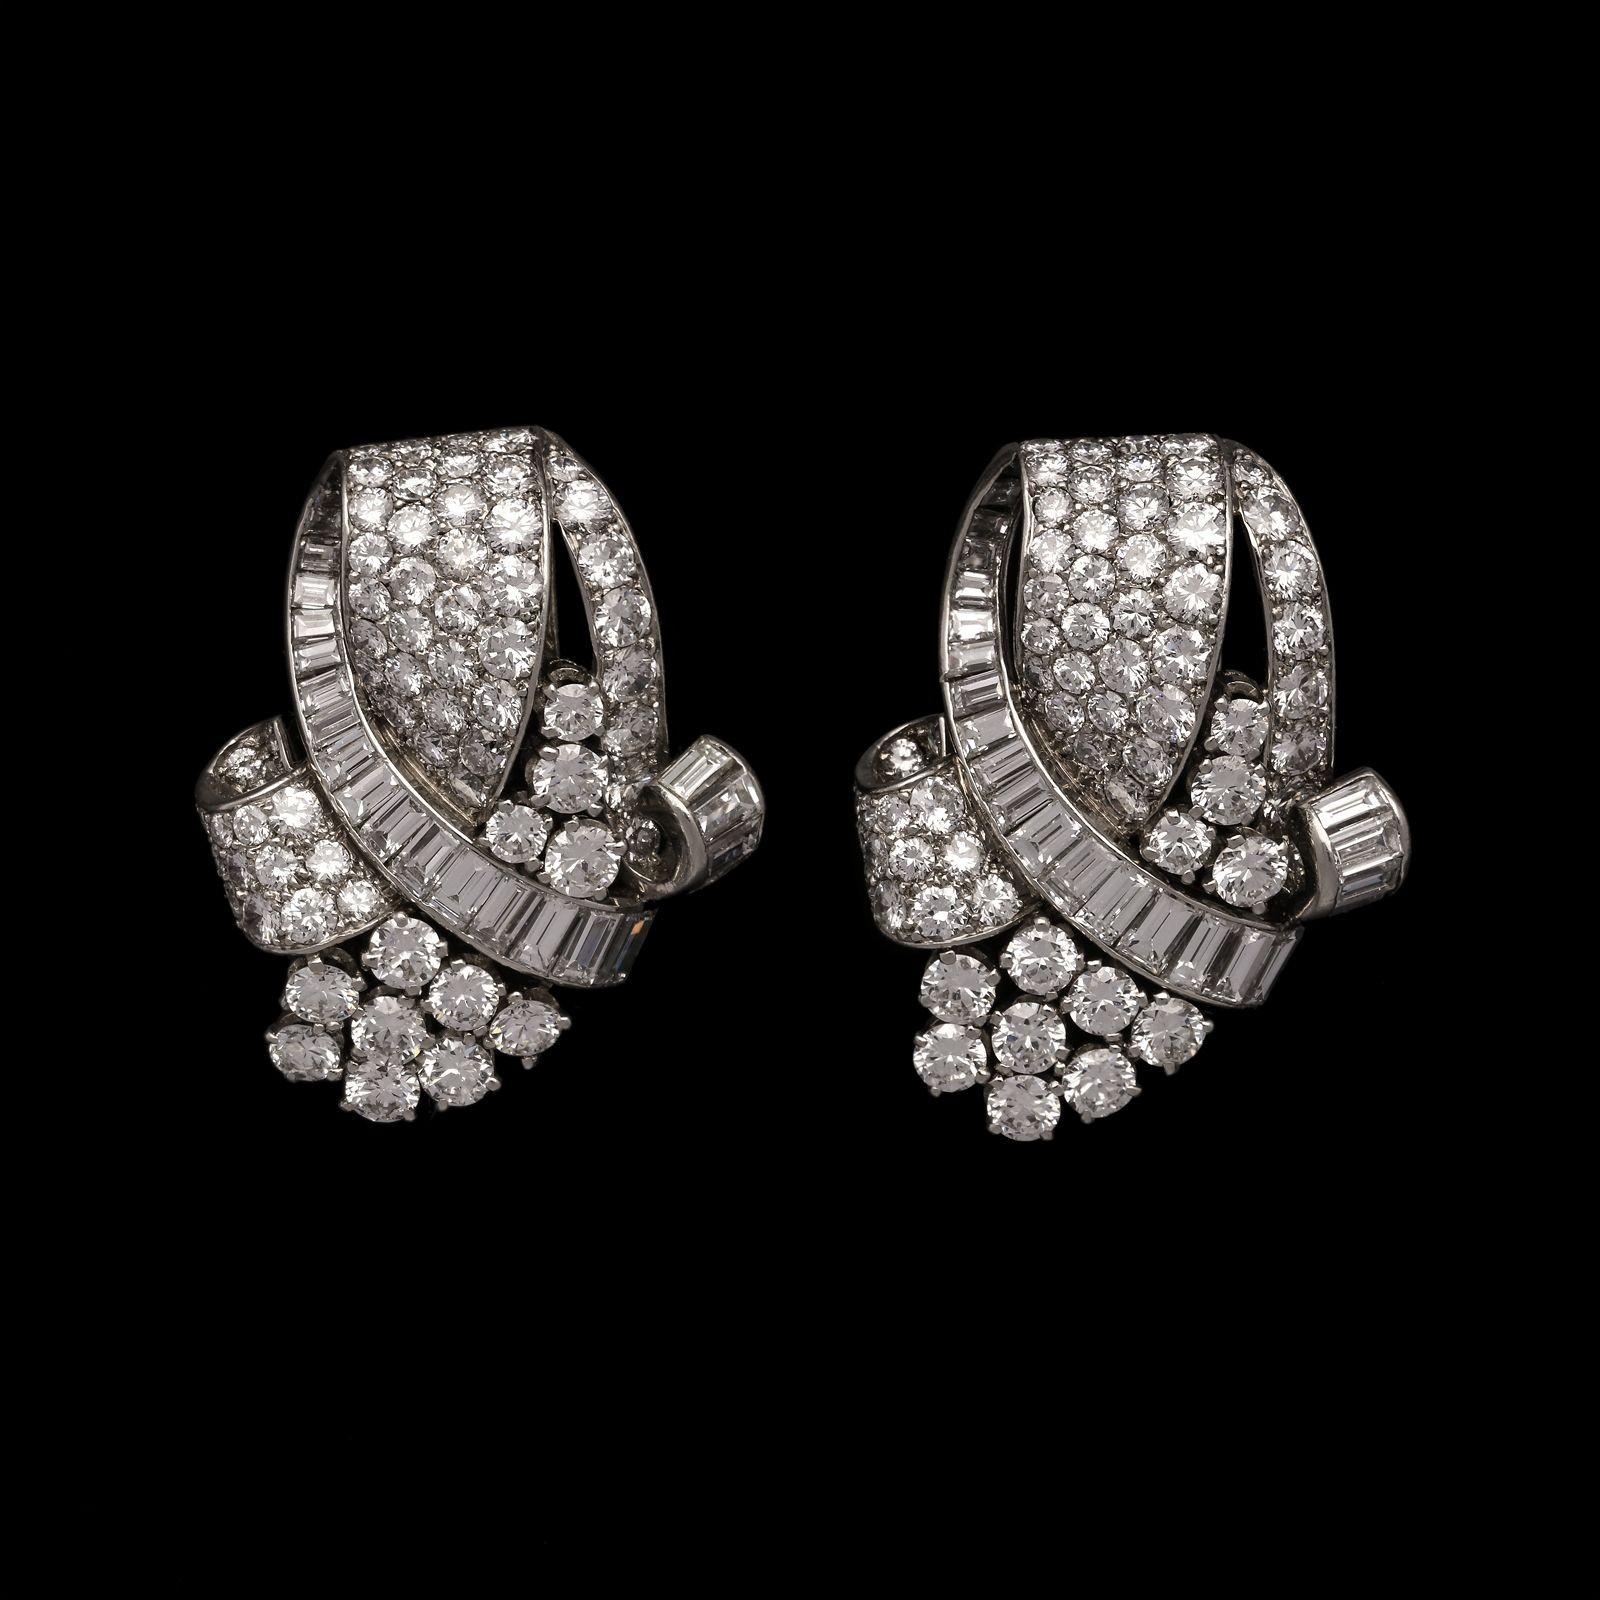 A stunning French diamond double clip brooch c.1935, the matching pair of clips have an asymmetric three-dimensional form and are set throughout with round brilliant cut diamonds in both pavé and claw settings as well as baguette cut diamonds in